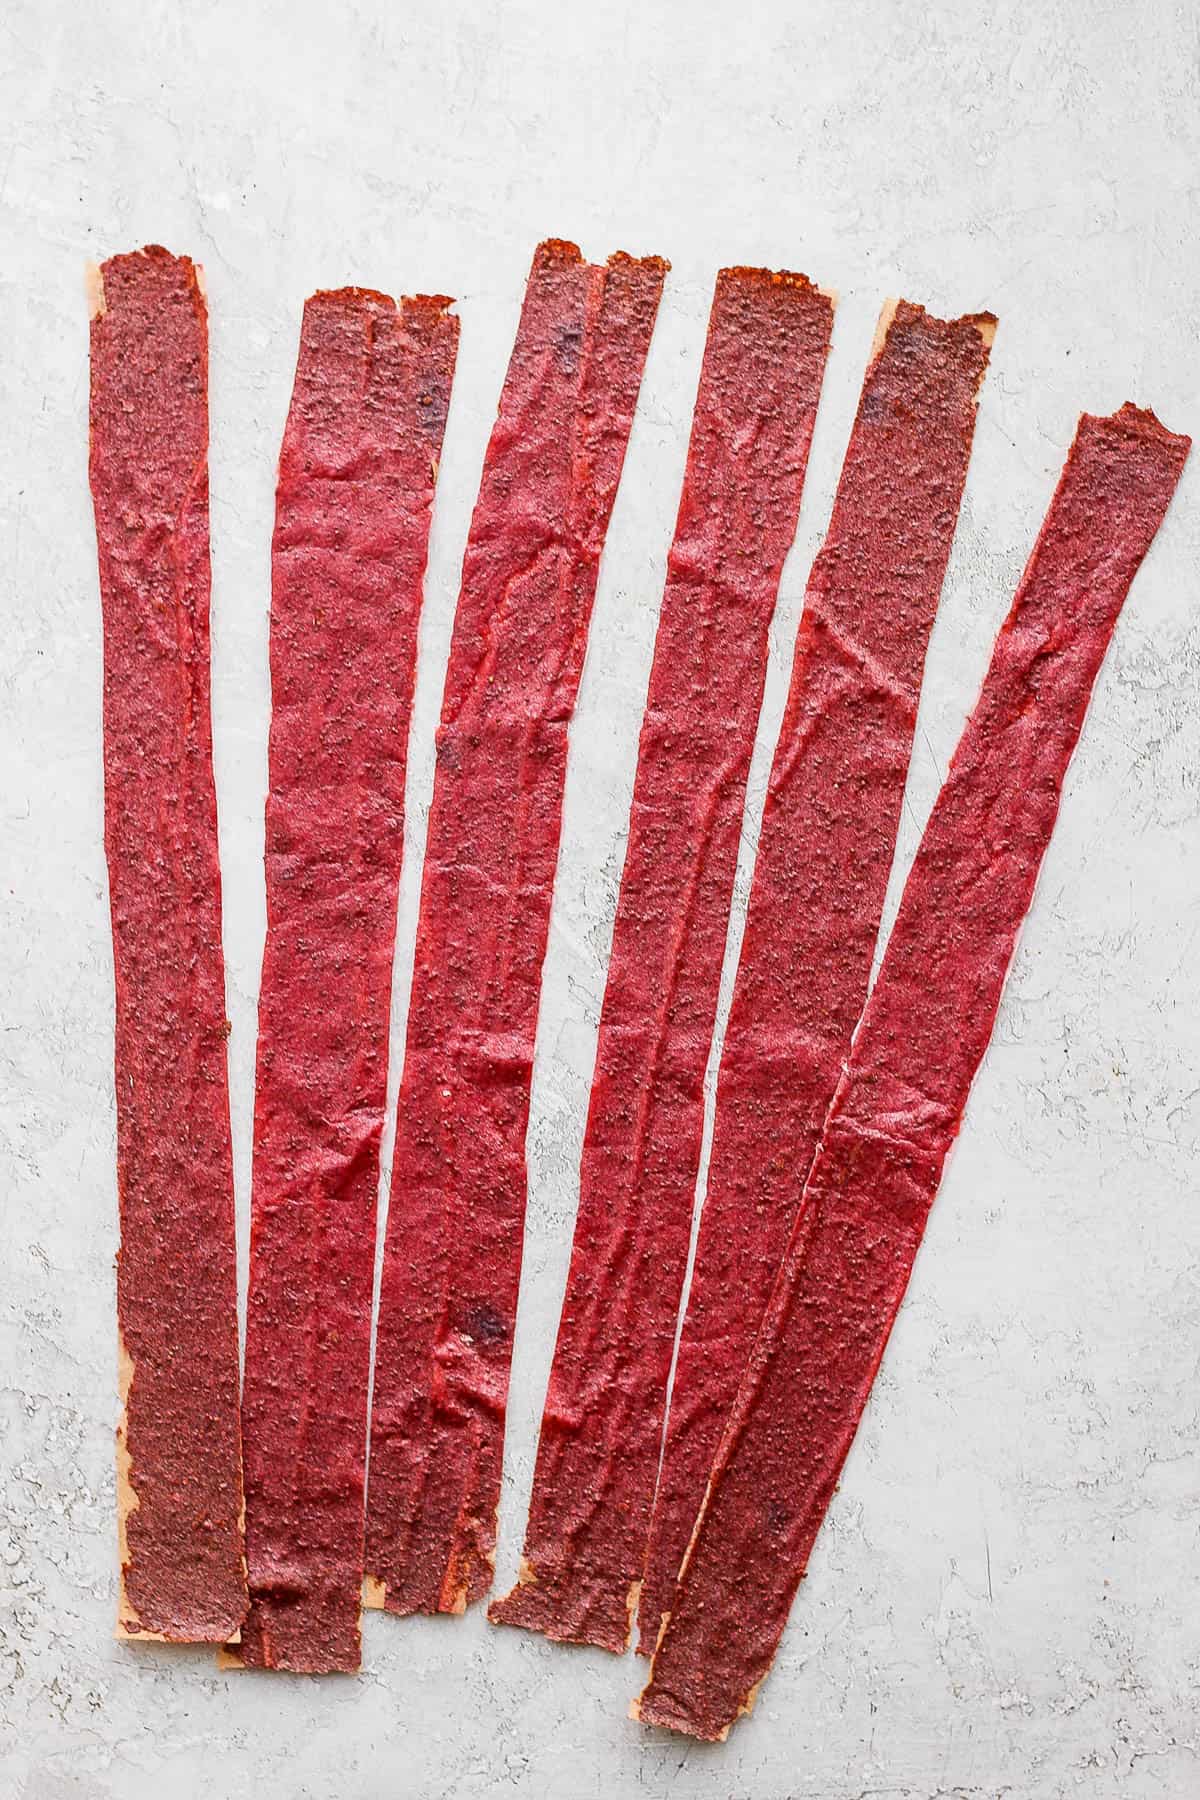 Strips of fruit leather